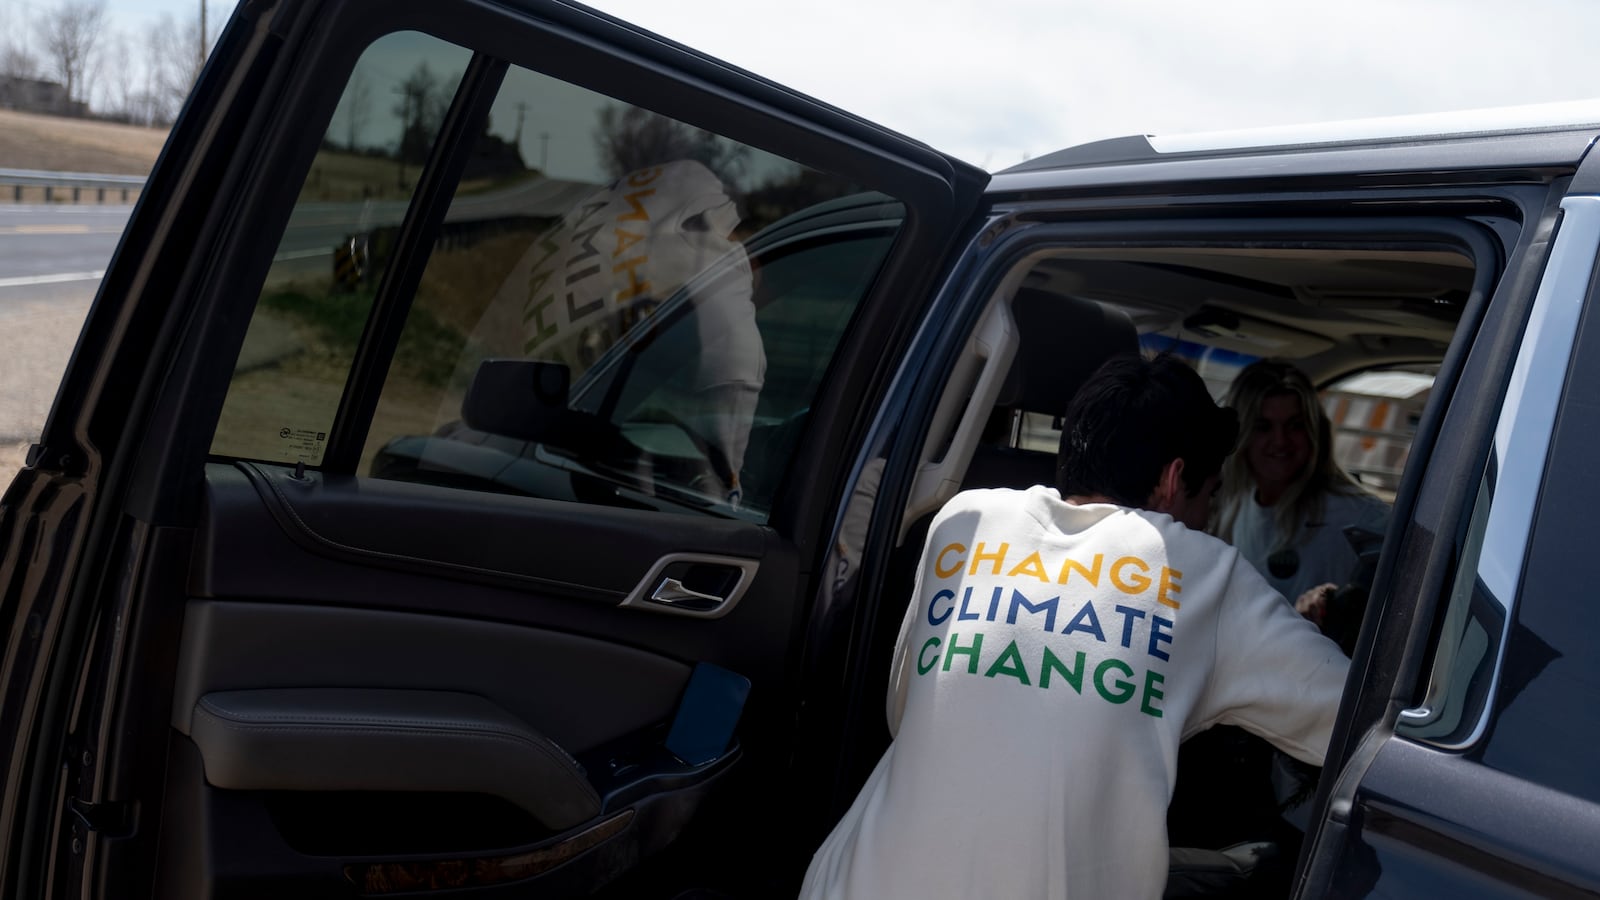 A young man climbs into the back of a car after a tree planting event. The back of his white shirt reads, “Change climate change.”